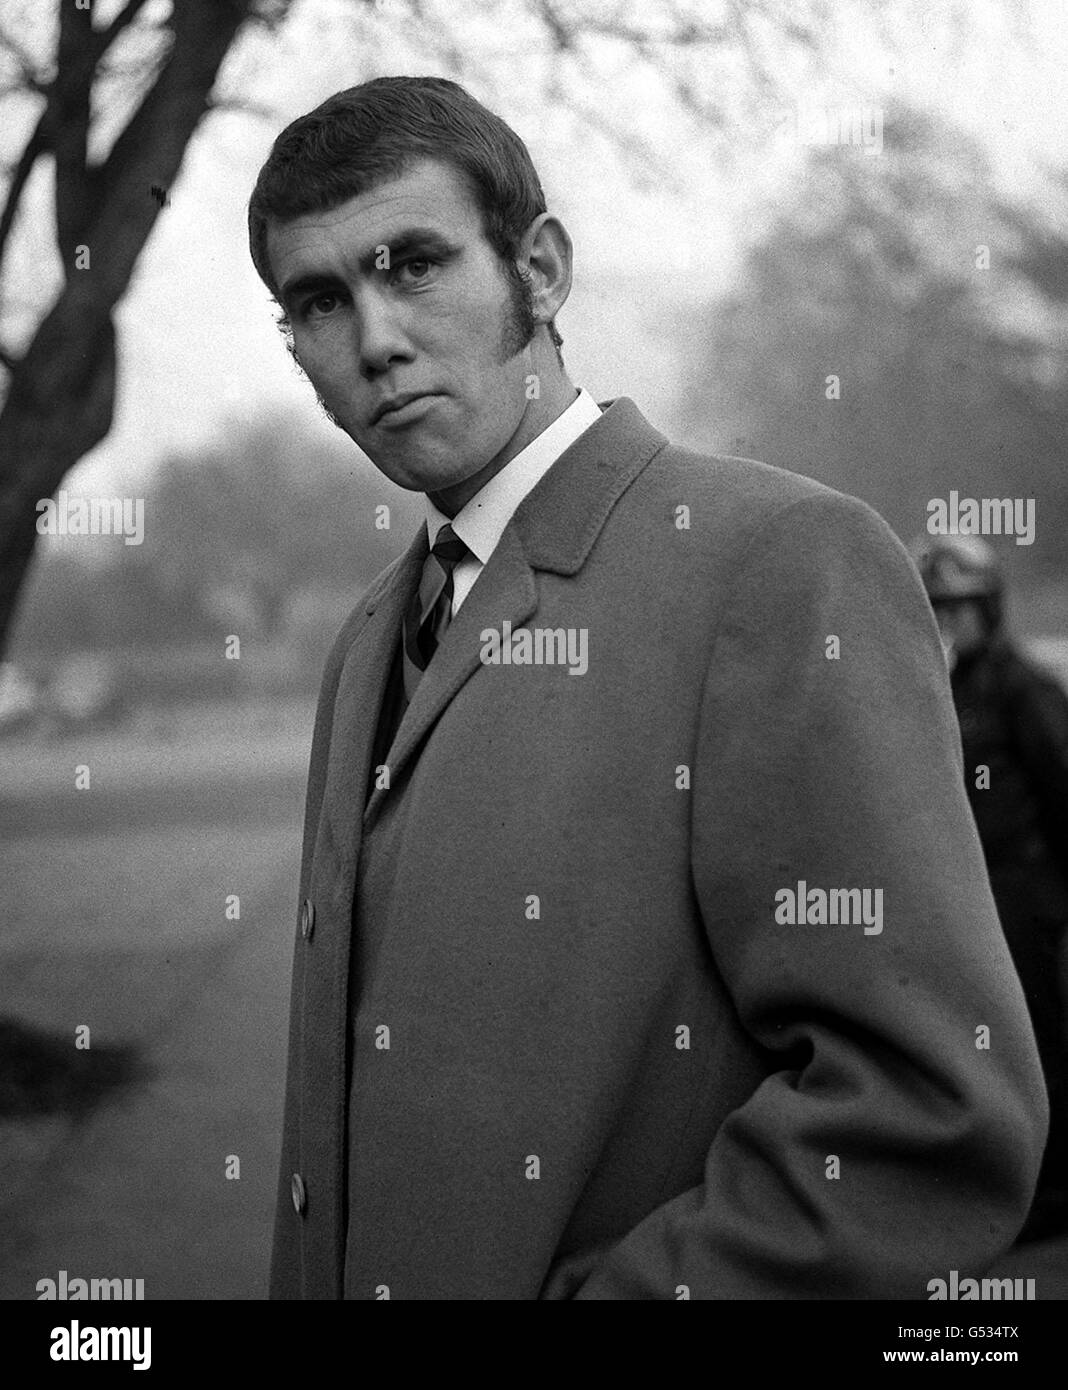 Chris Finnegan, a middleweight boxer who won a gold medal in the 1968 Olympic Games and then turned professional, appearing at Slough Court, Bucks, on a National Insurance stamp summons. 31/12/69: Finnegan to receive the MBE in the New Years Honours. Stock Photo